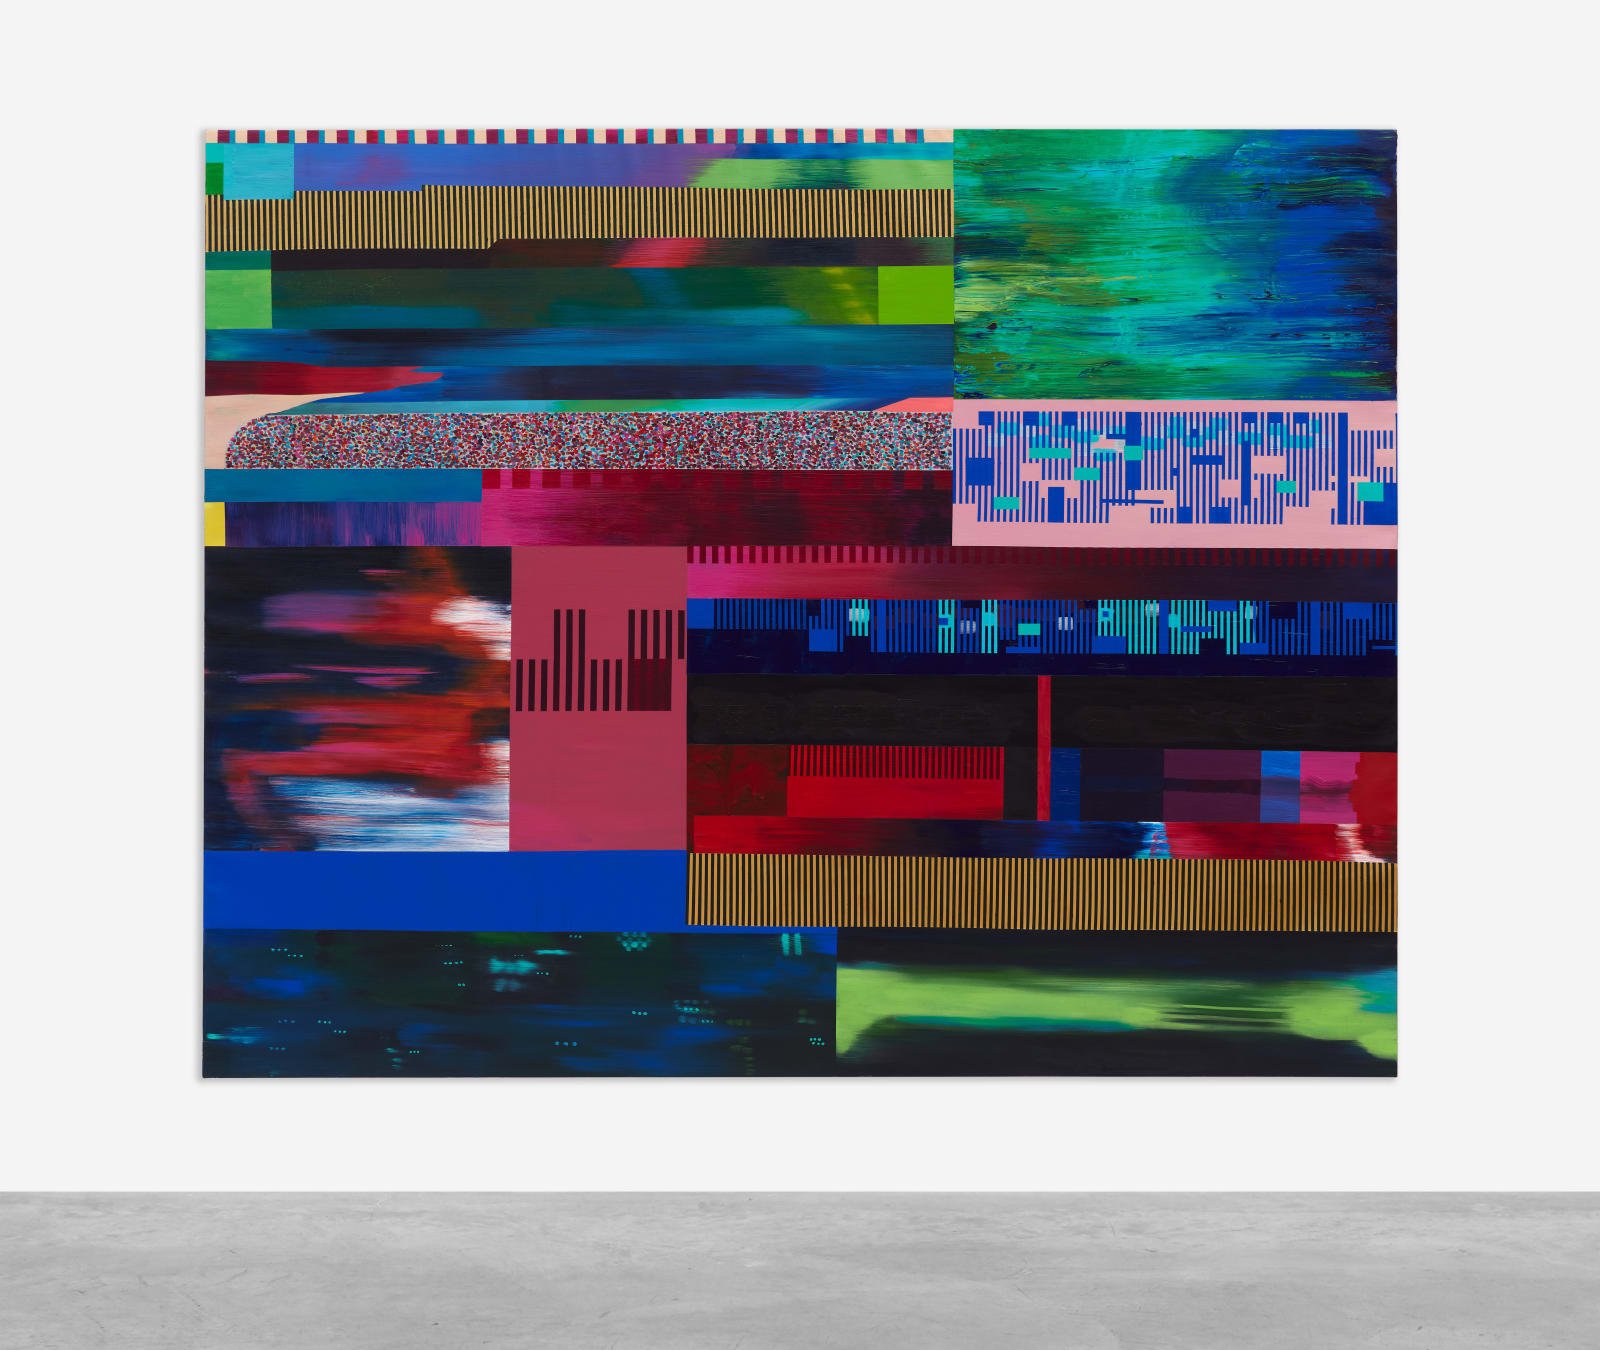   THE GLITCH , 2023  Oil and acrylic on linen  193 x 244 cm (76 x 96 in) 